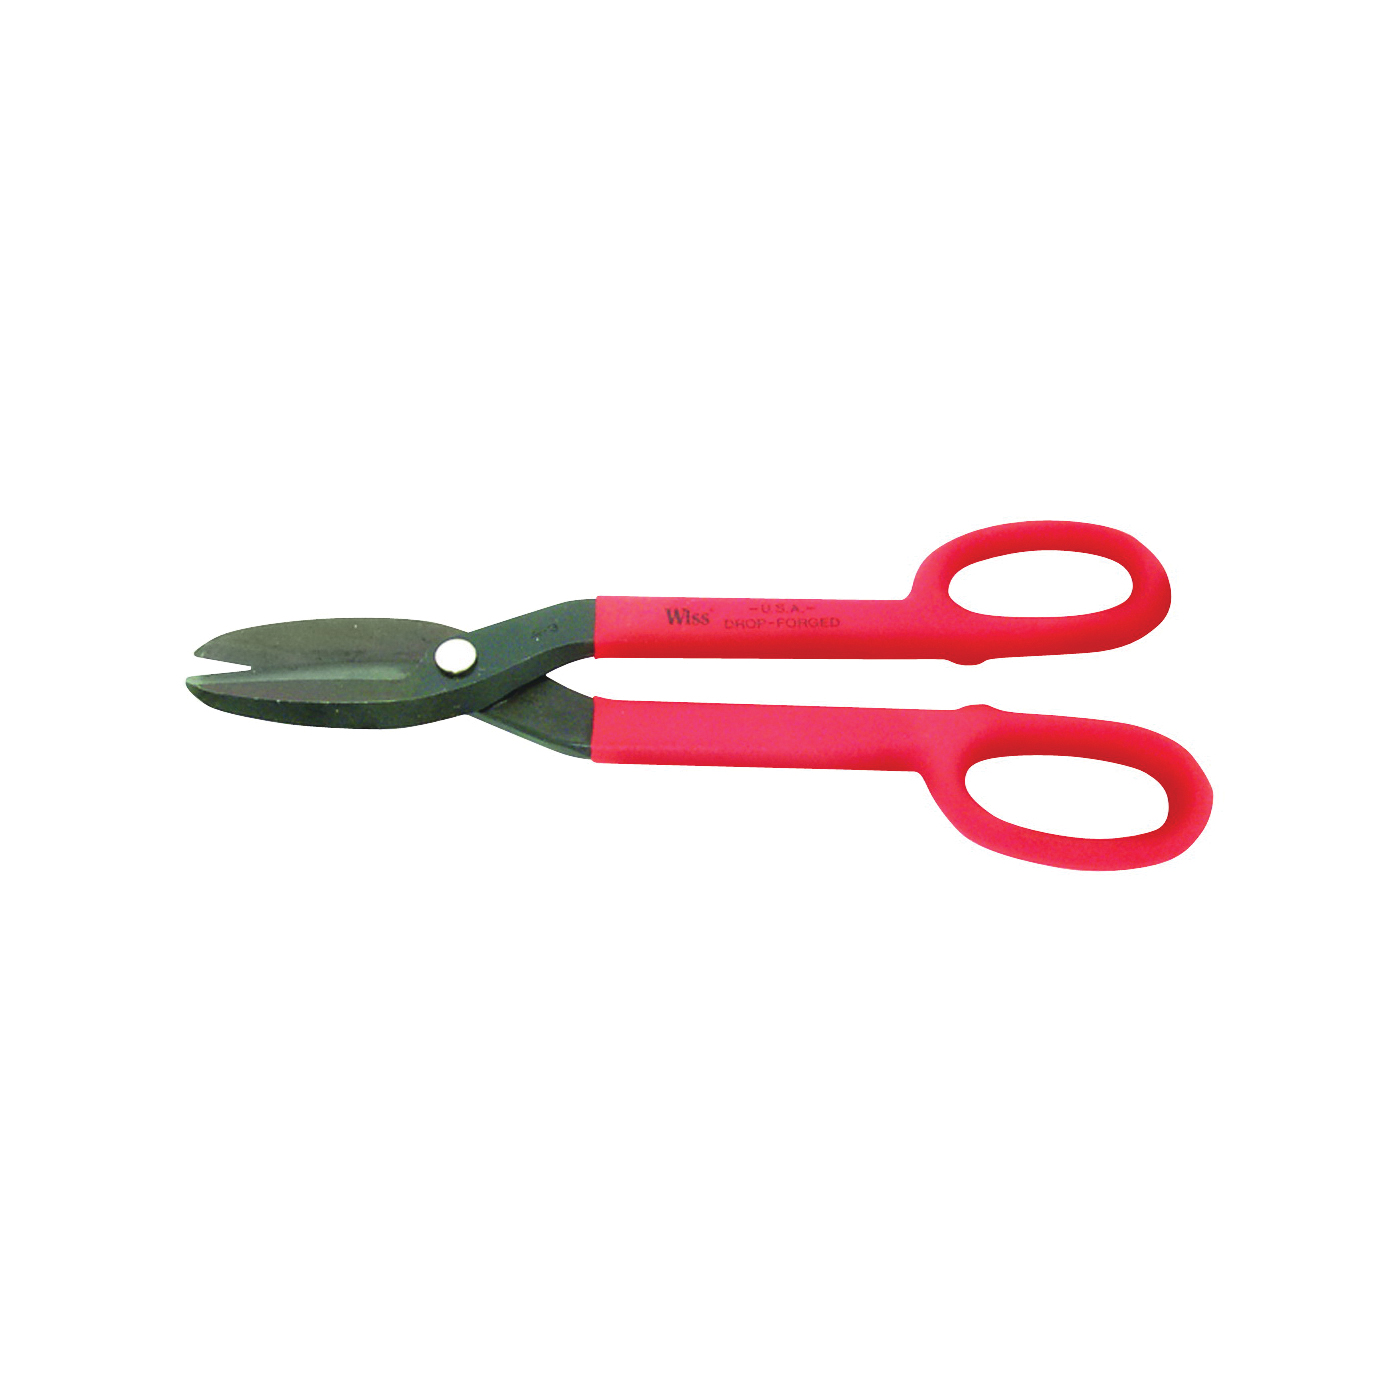 Crescent Wiss A9N Tinner Snip, 12-1/2 in OAL, Curved, Straight Cut, Steel Blade, Cushion-Grip Handle, Red Handle